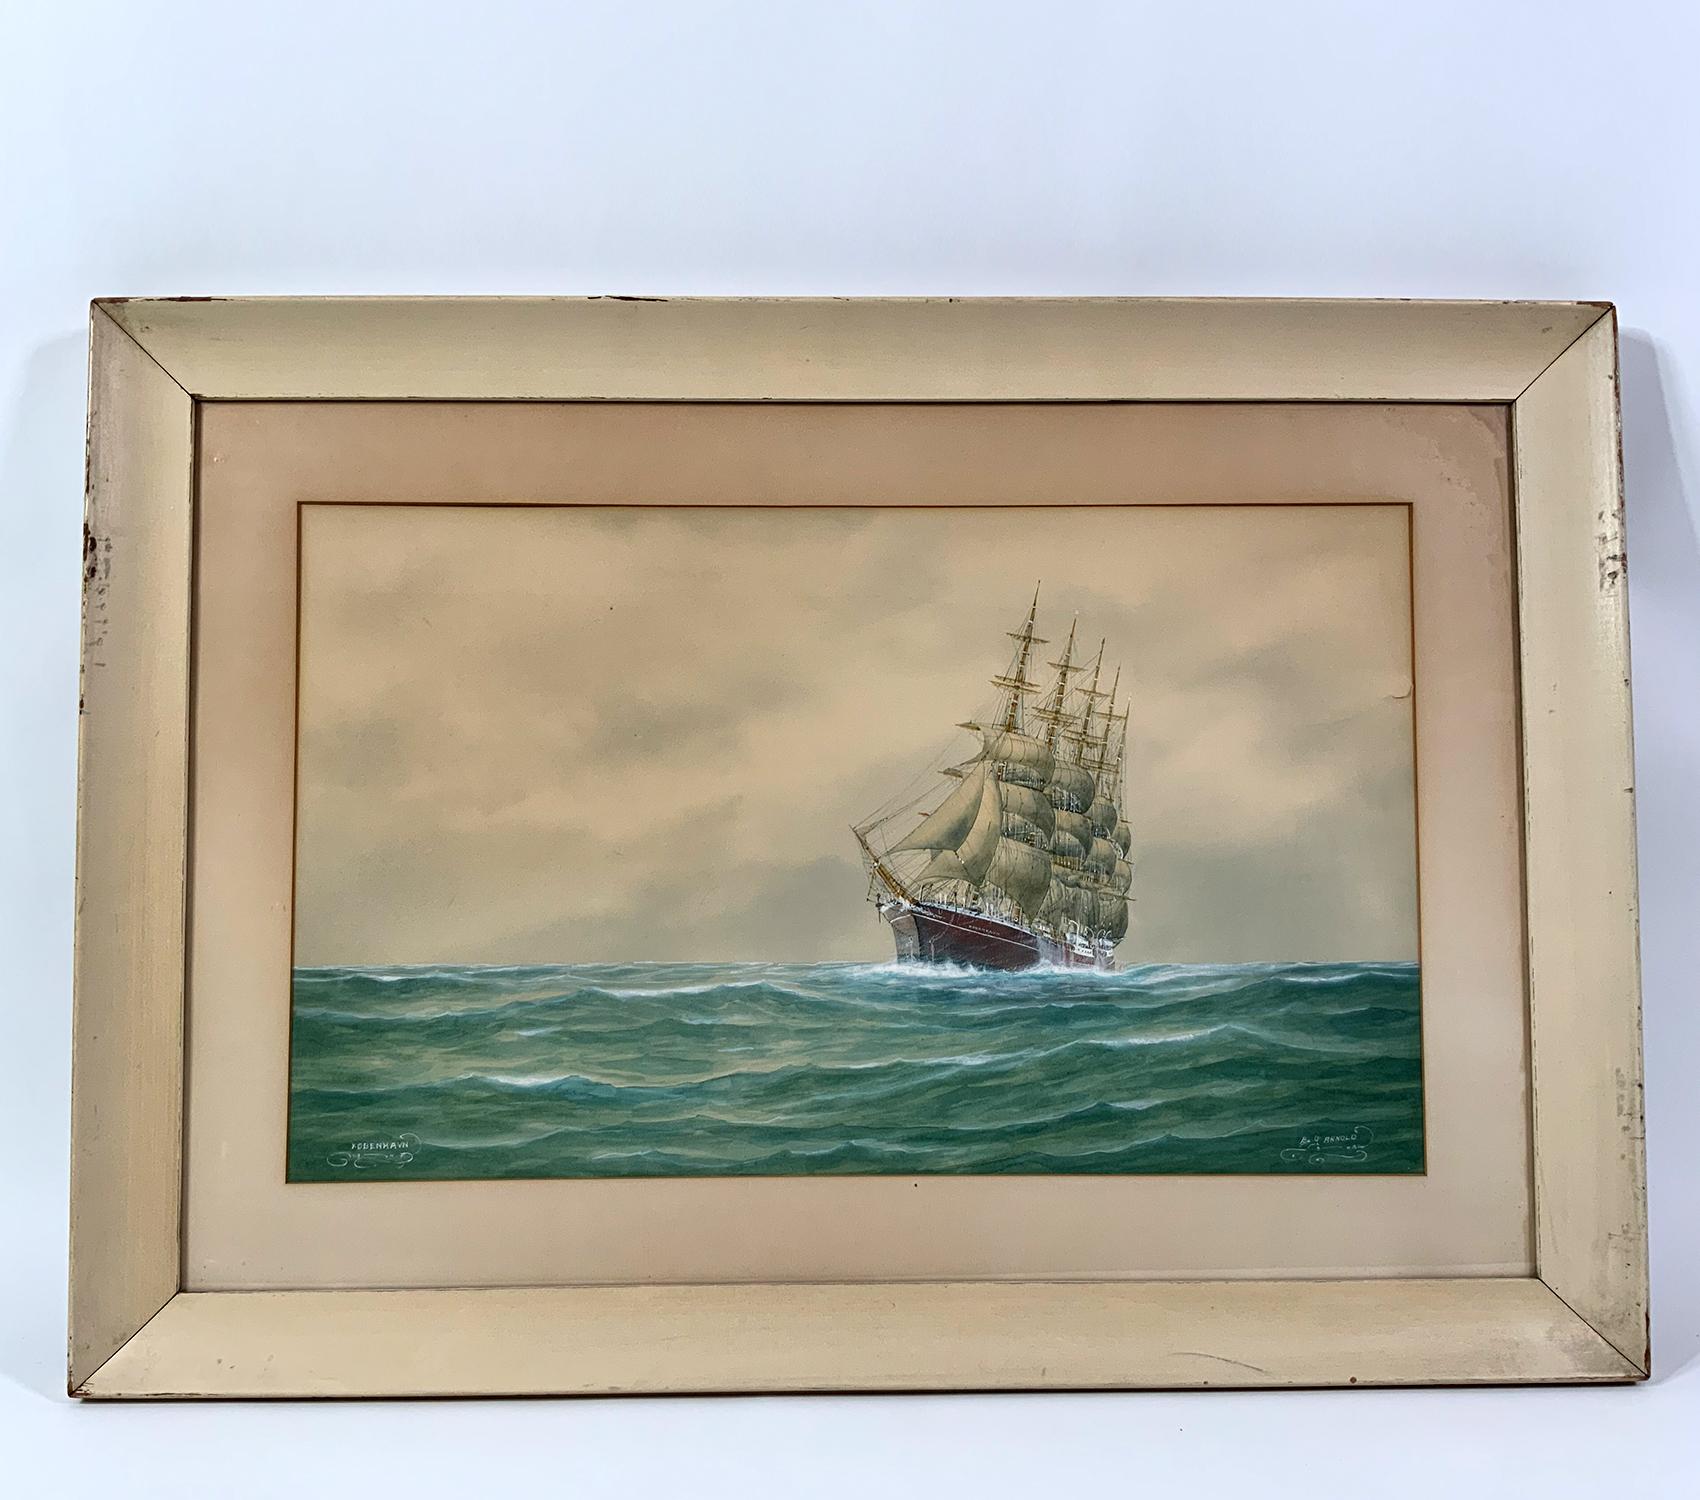 Well executed watercolor/gouache showing the great windjammer Kobenhaven under sail. The massive four masted barque has most sails set. Matted and framed. Titled lower left “Kobenhavn” and signed J Arnold lower right.

Weight: 8 LBS
Overall